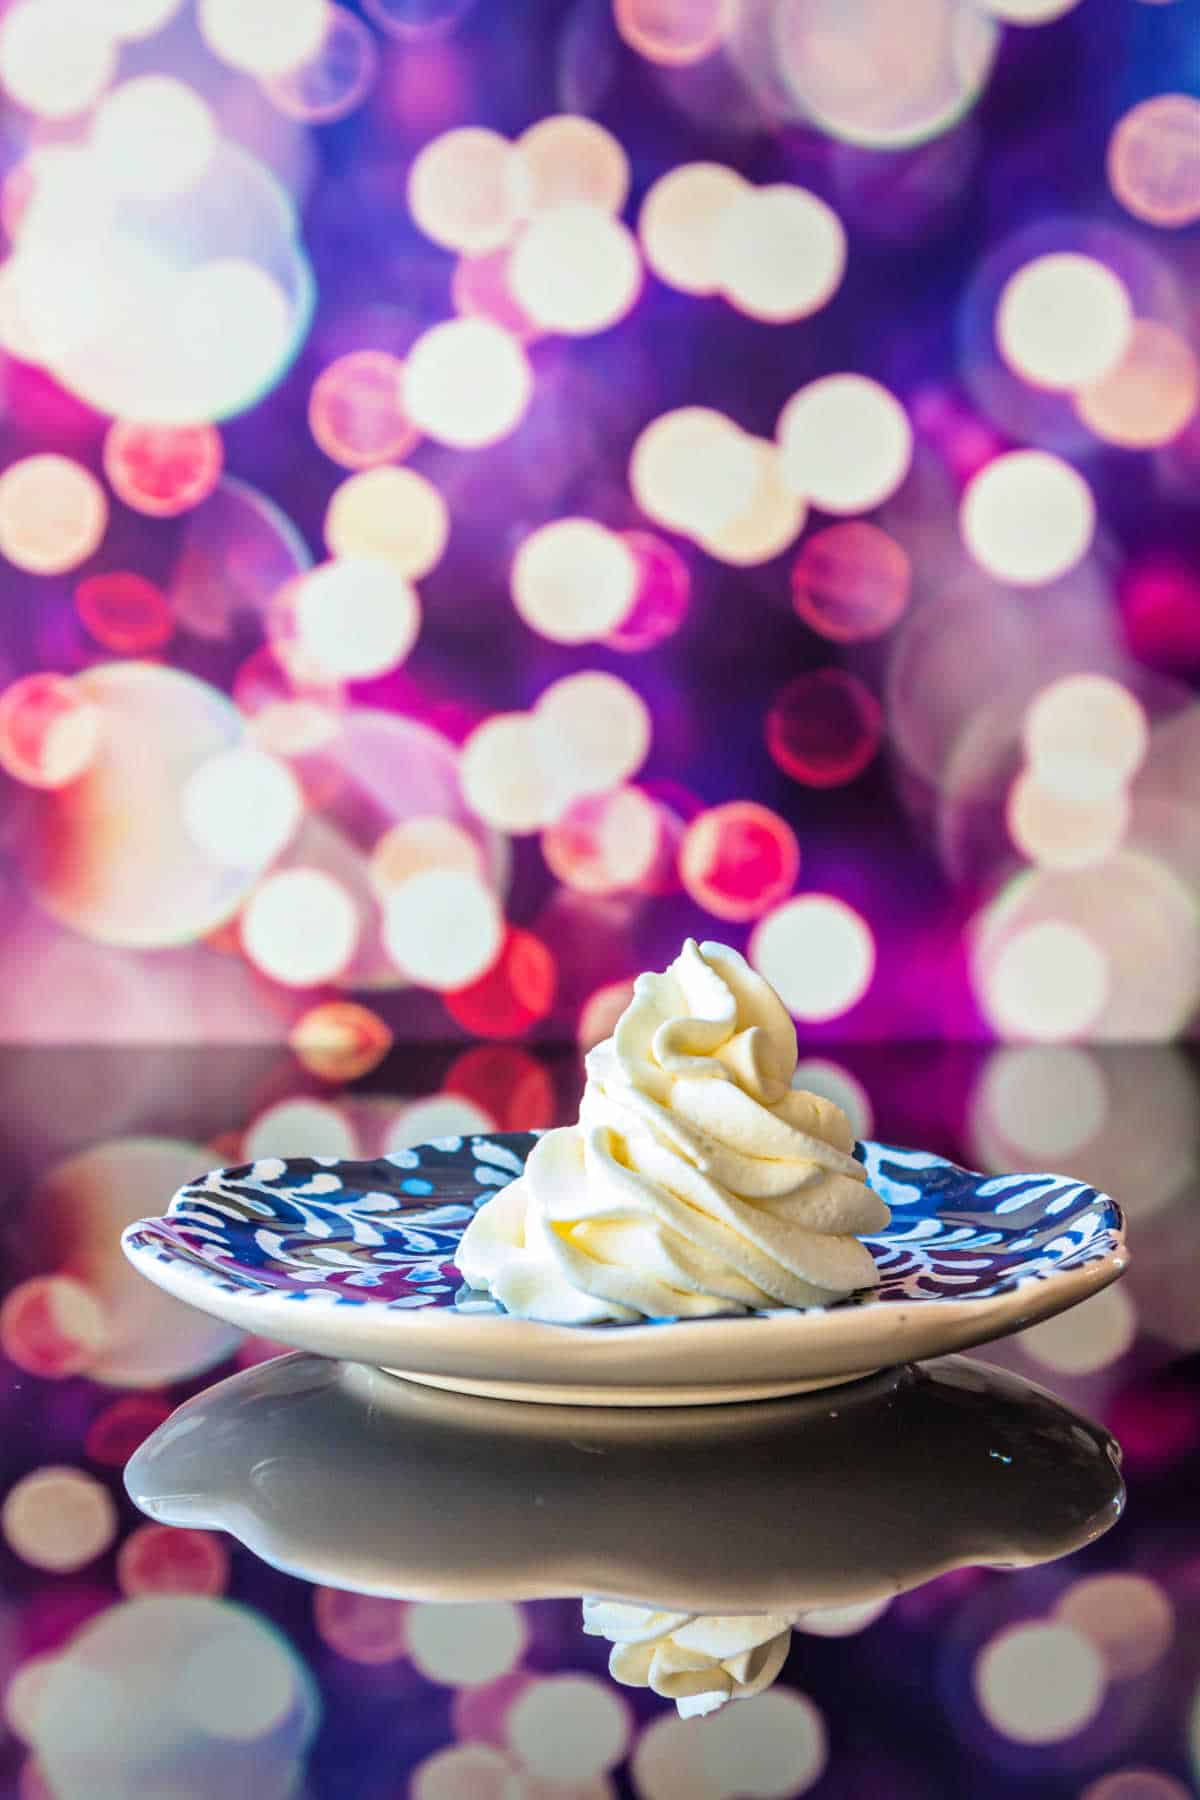 Piped whipped cream on a blue-patterned plate shot against a background of fuscia and purple with twinkling lights.